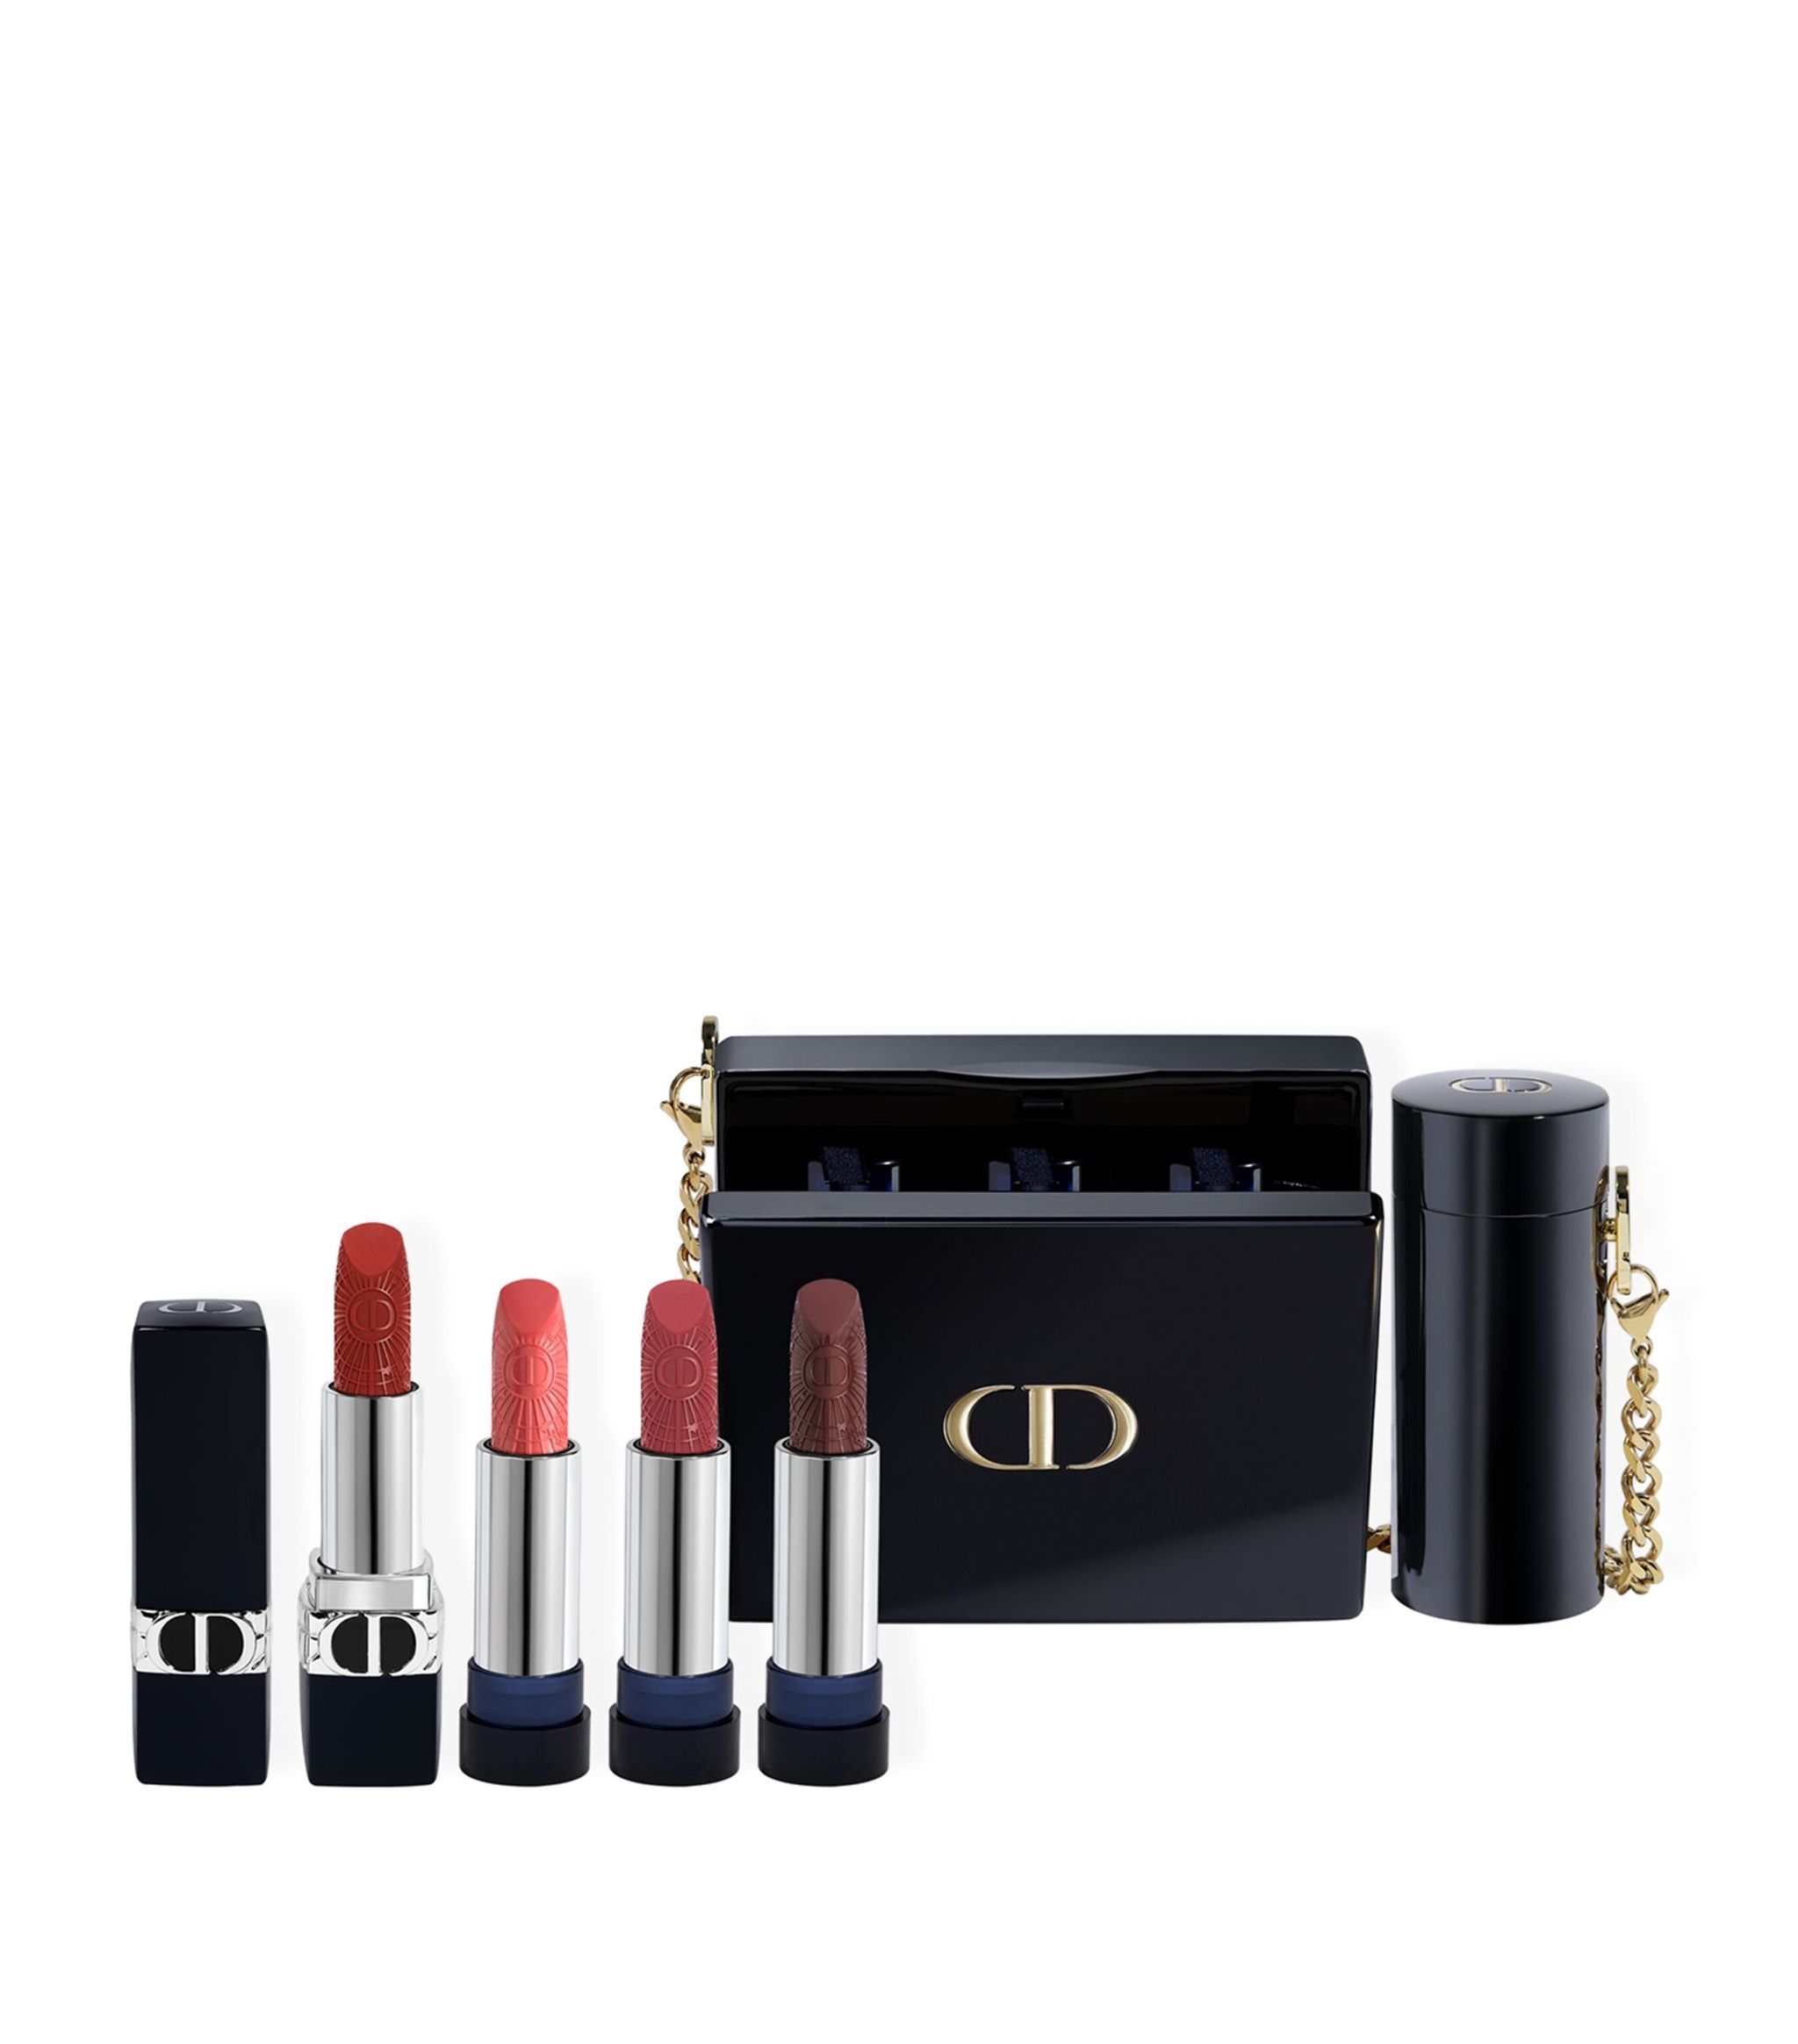 DIOR The Atelier Of Dreams Rouge Dior Minaudiere Make-Up Set | Harrods US | Harrods